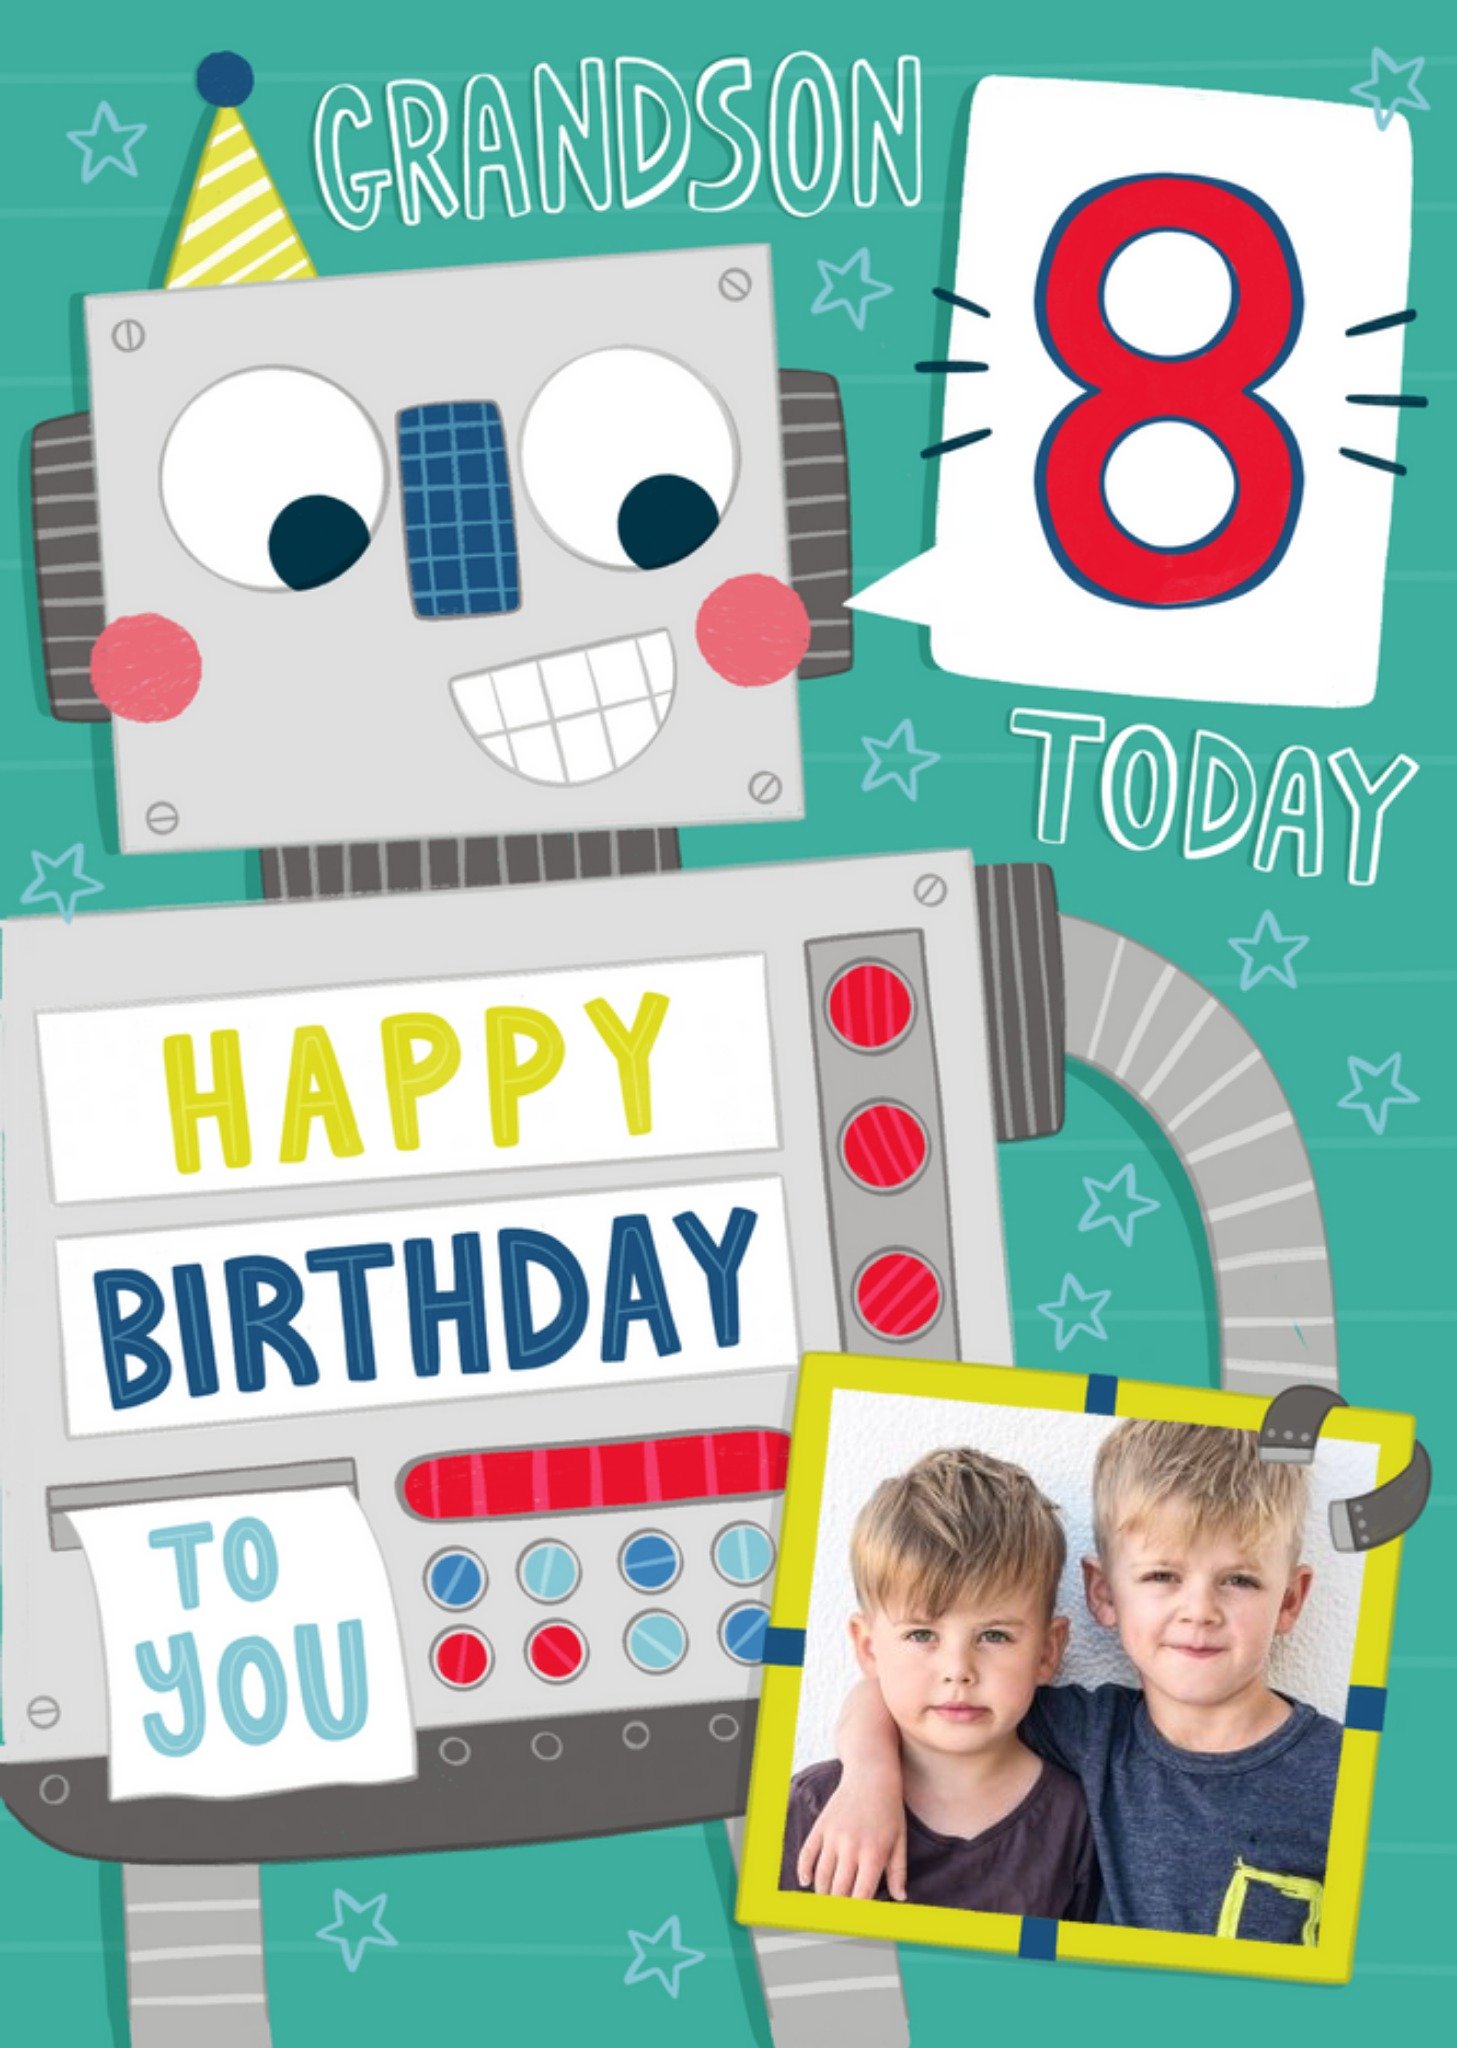 Moonpig Grandson 8 Today Happy Birthday To You Robot Photo Upload Card Ecard